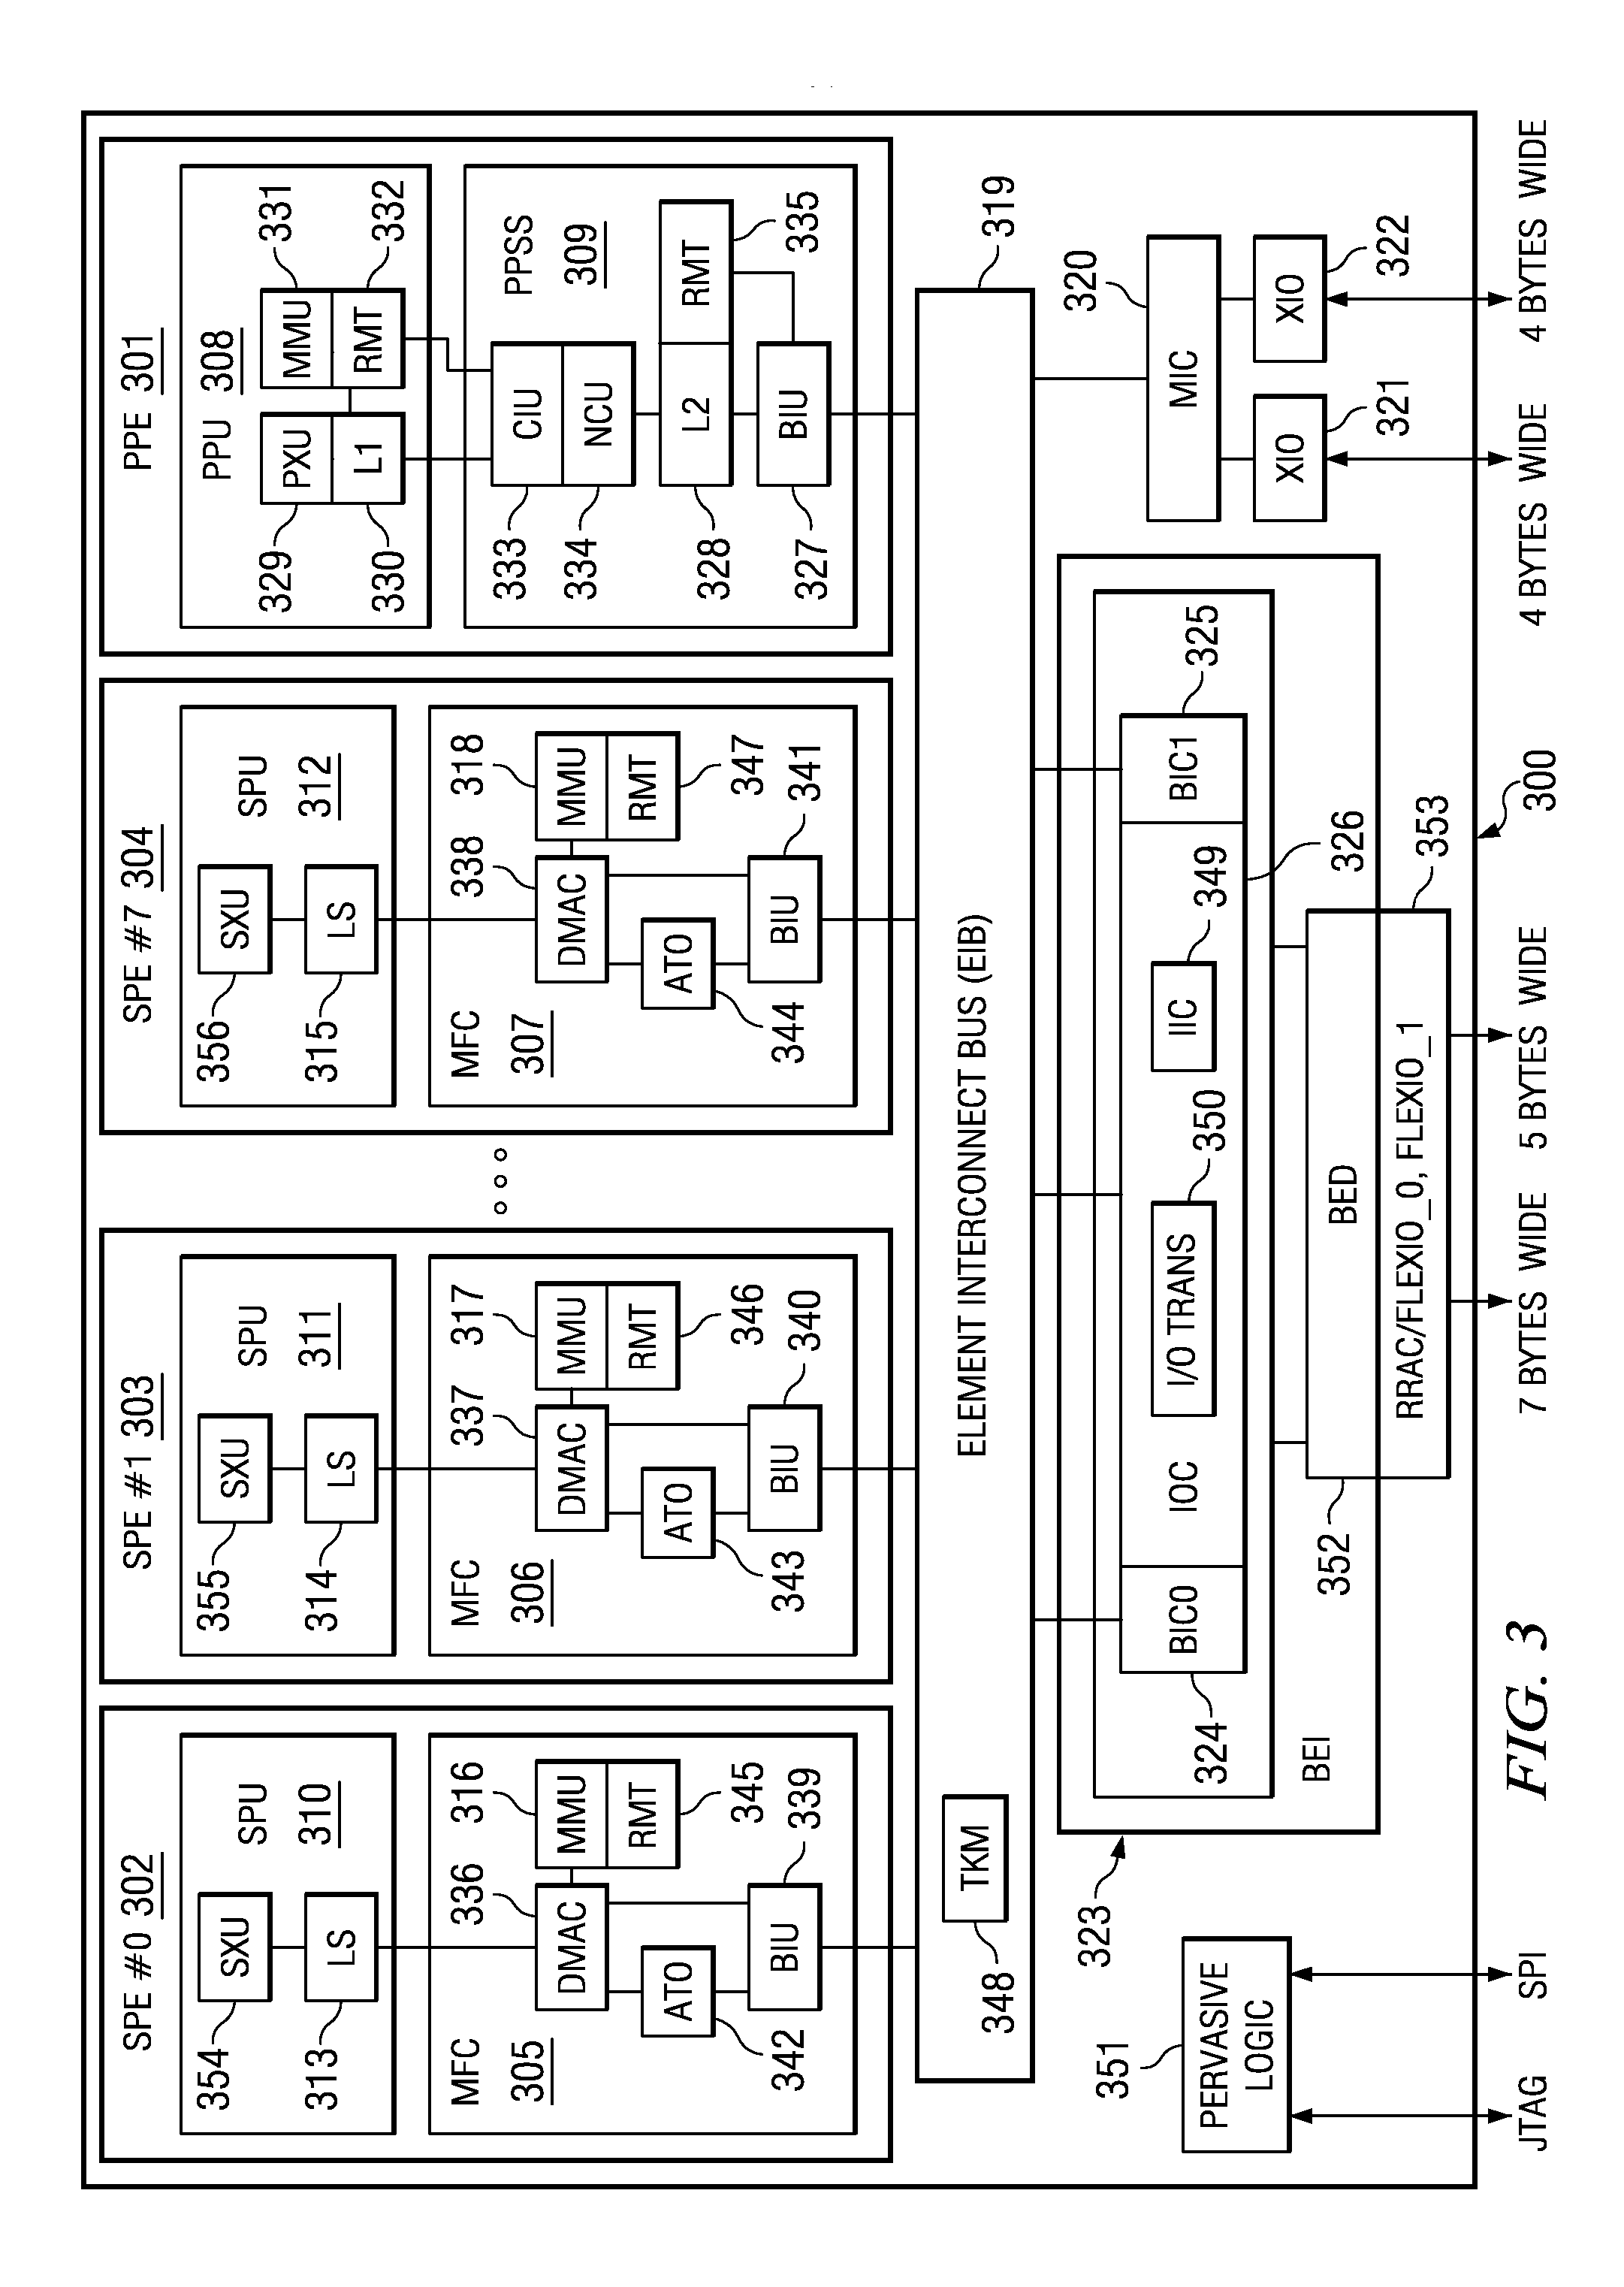 Dynamically adapting software for optimal thermal performance